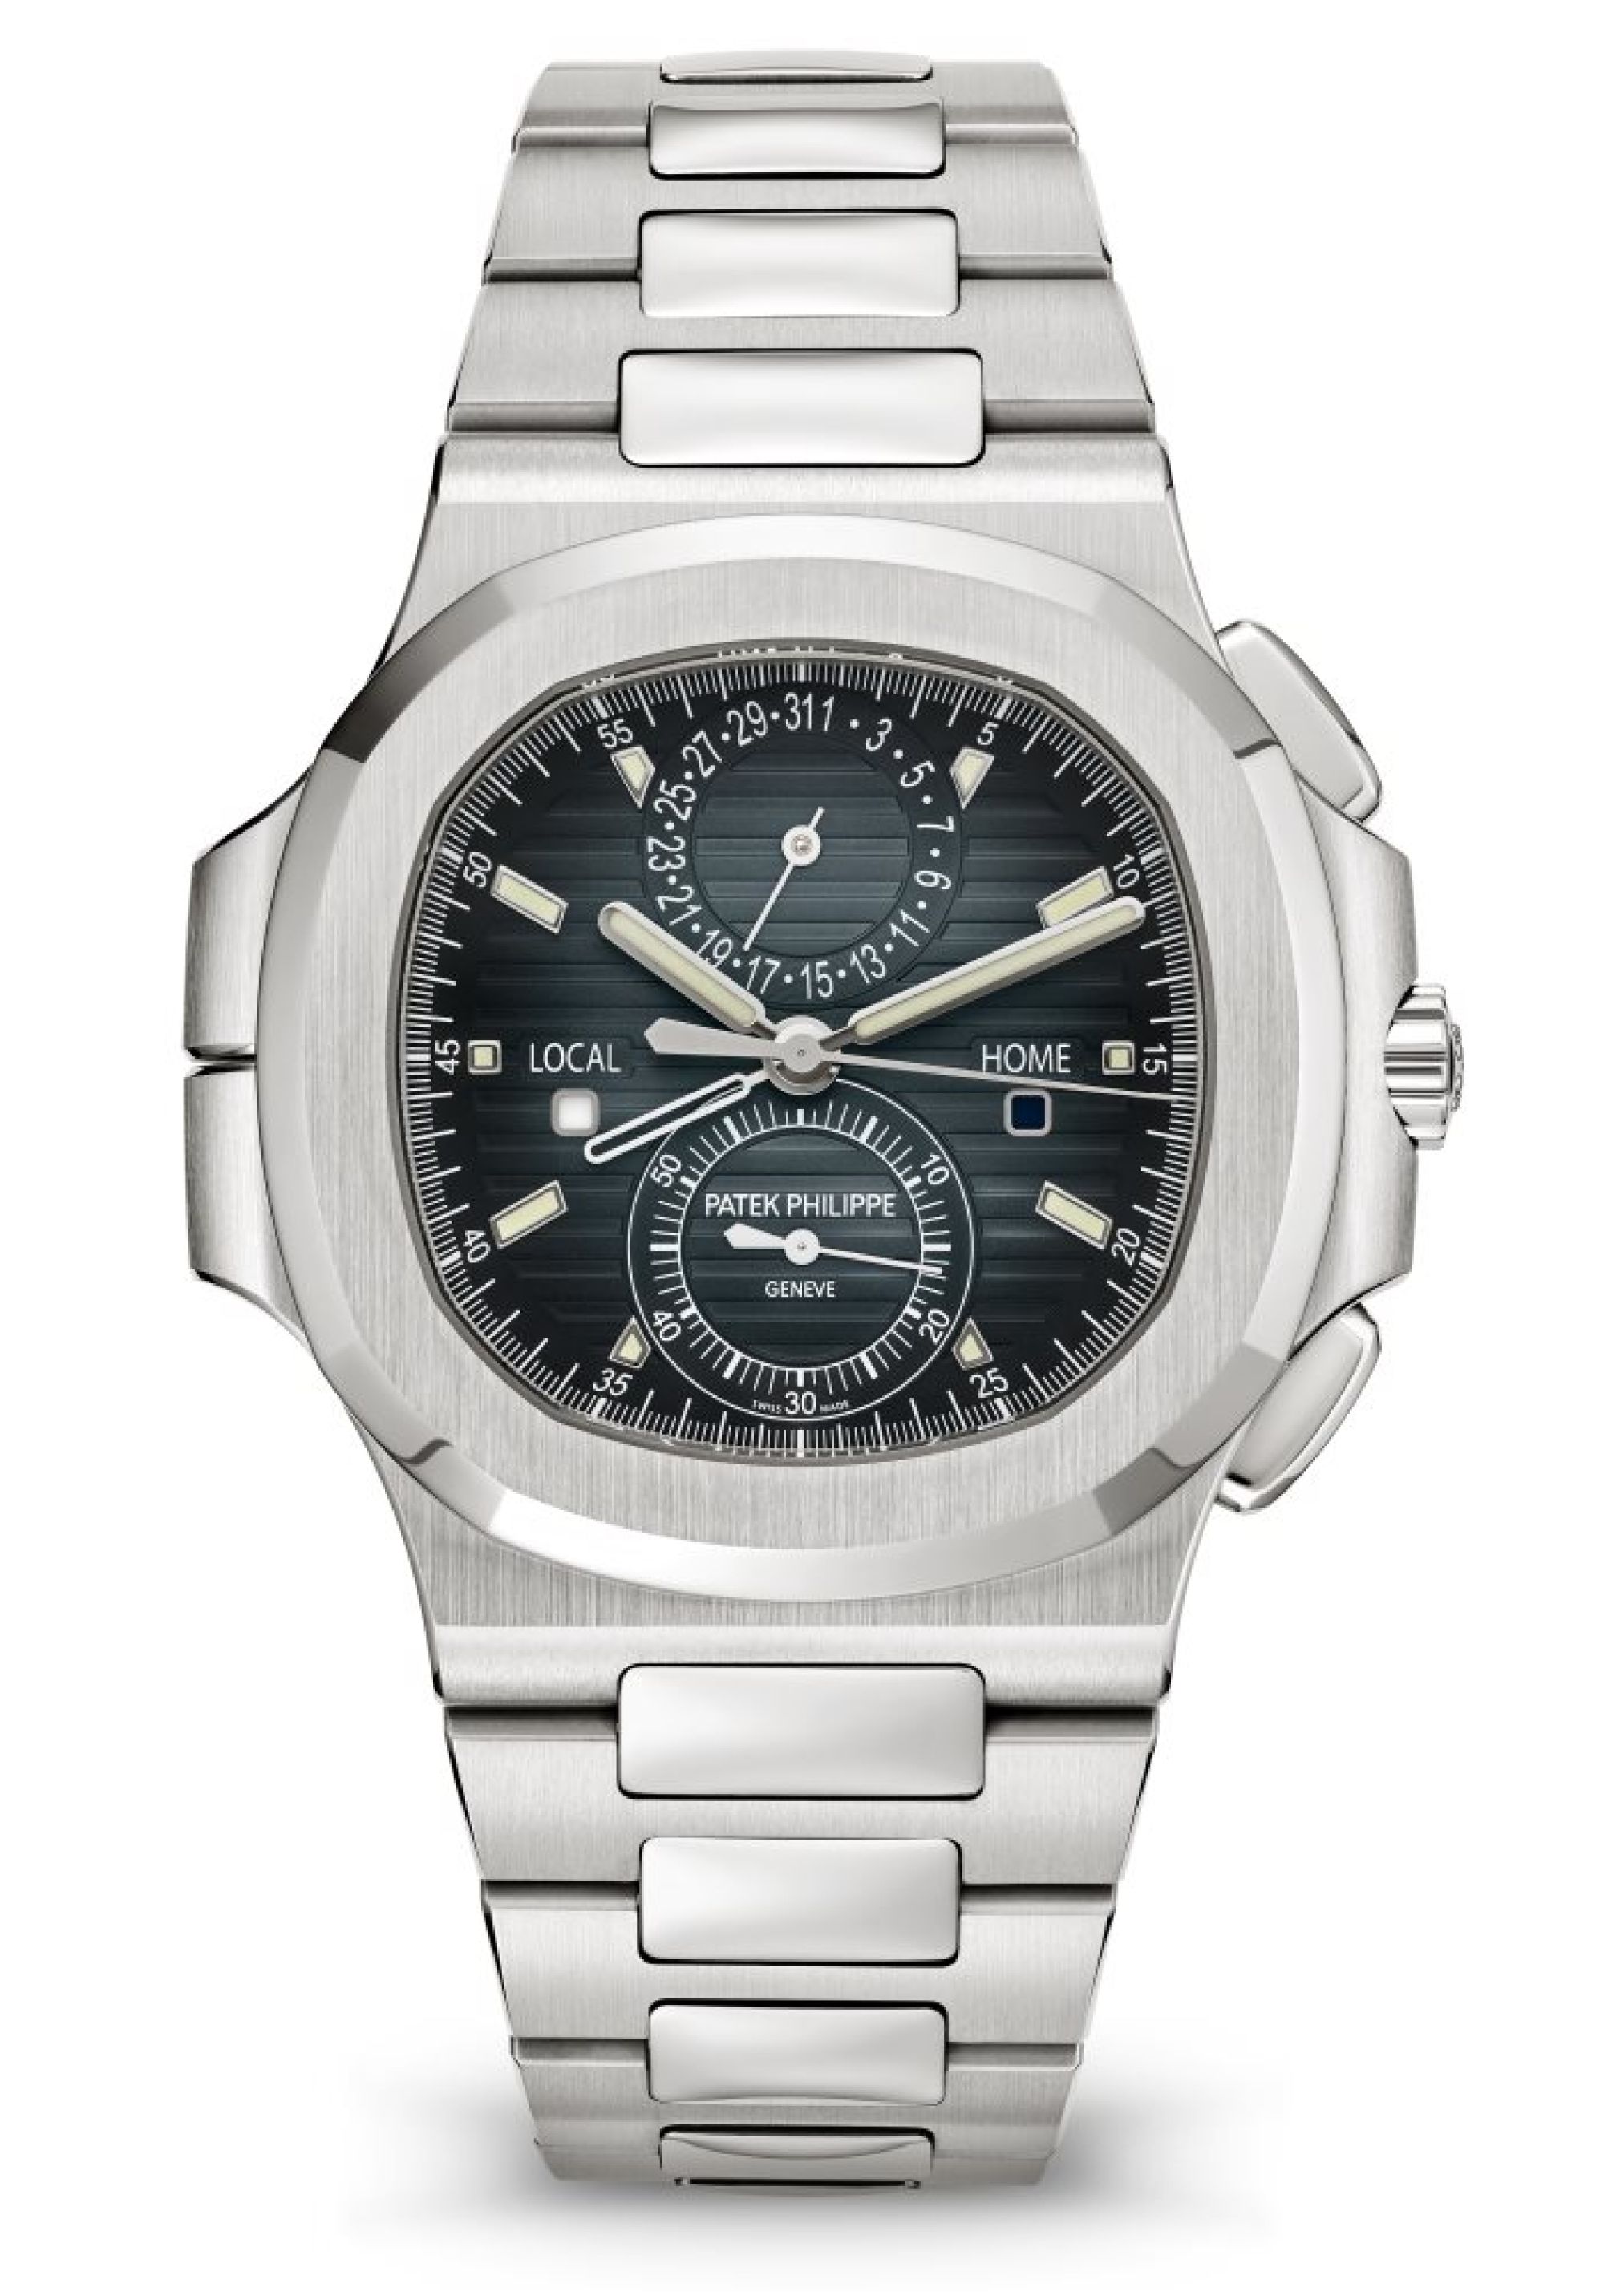 Patek Philippe Flyback-Chronograph, Travel Time. Face